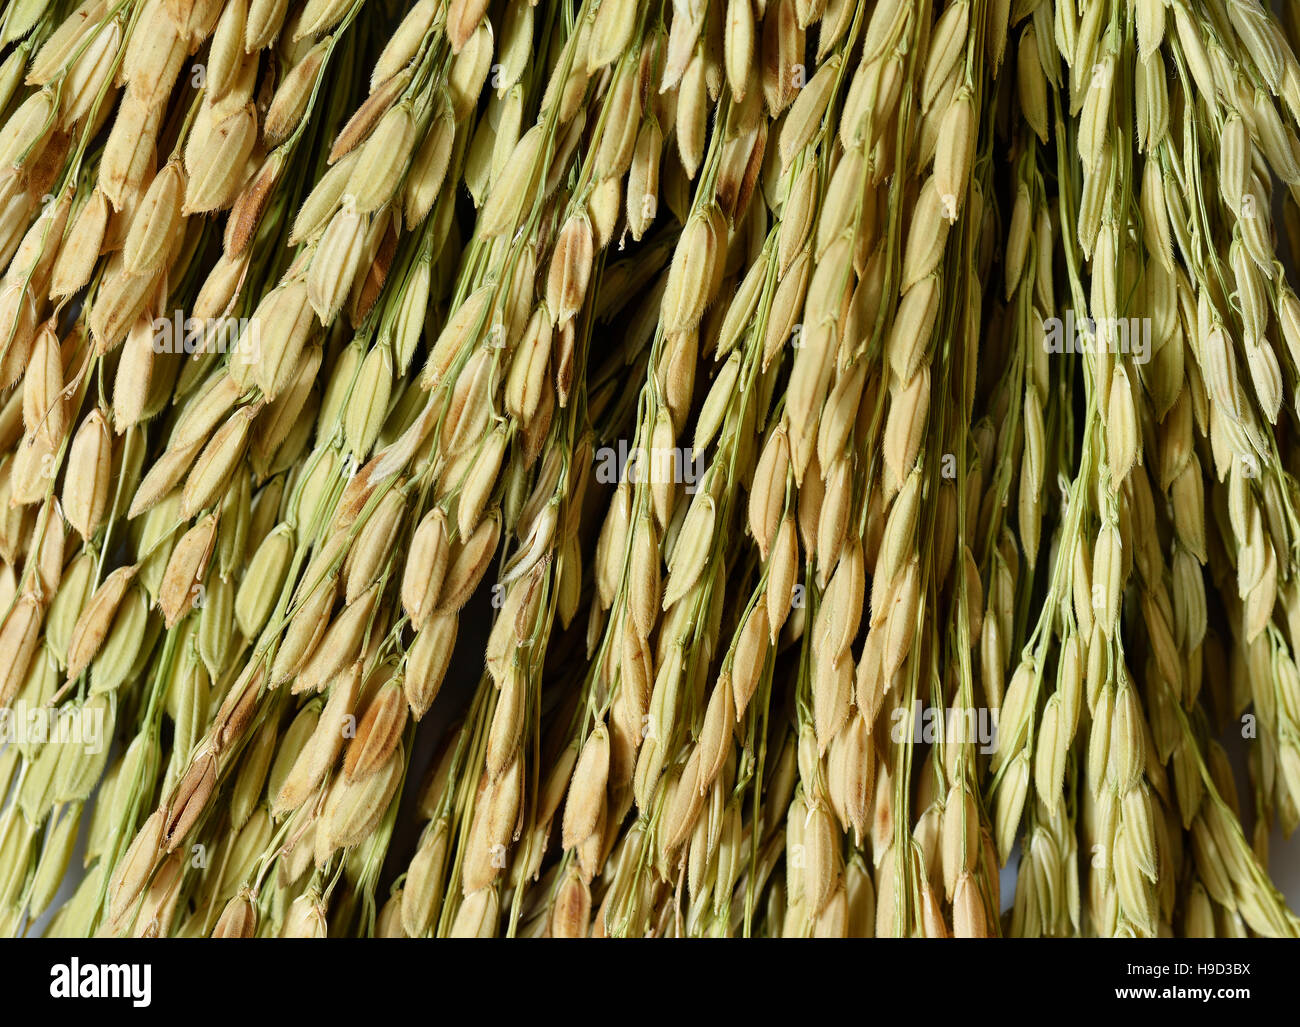 Close up of Ear of Rice Stock Photo